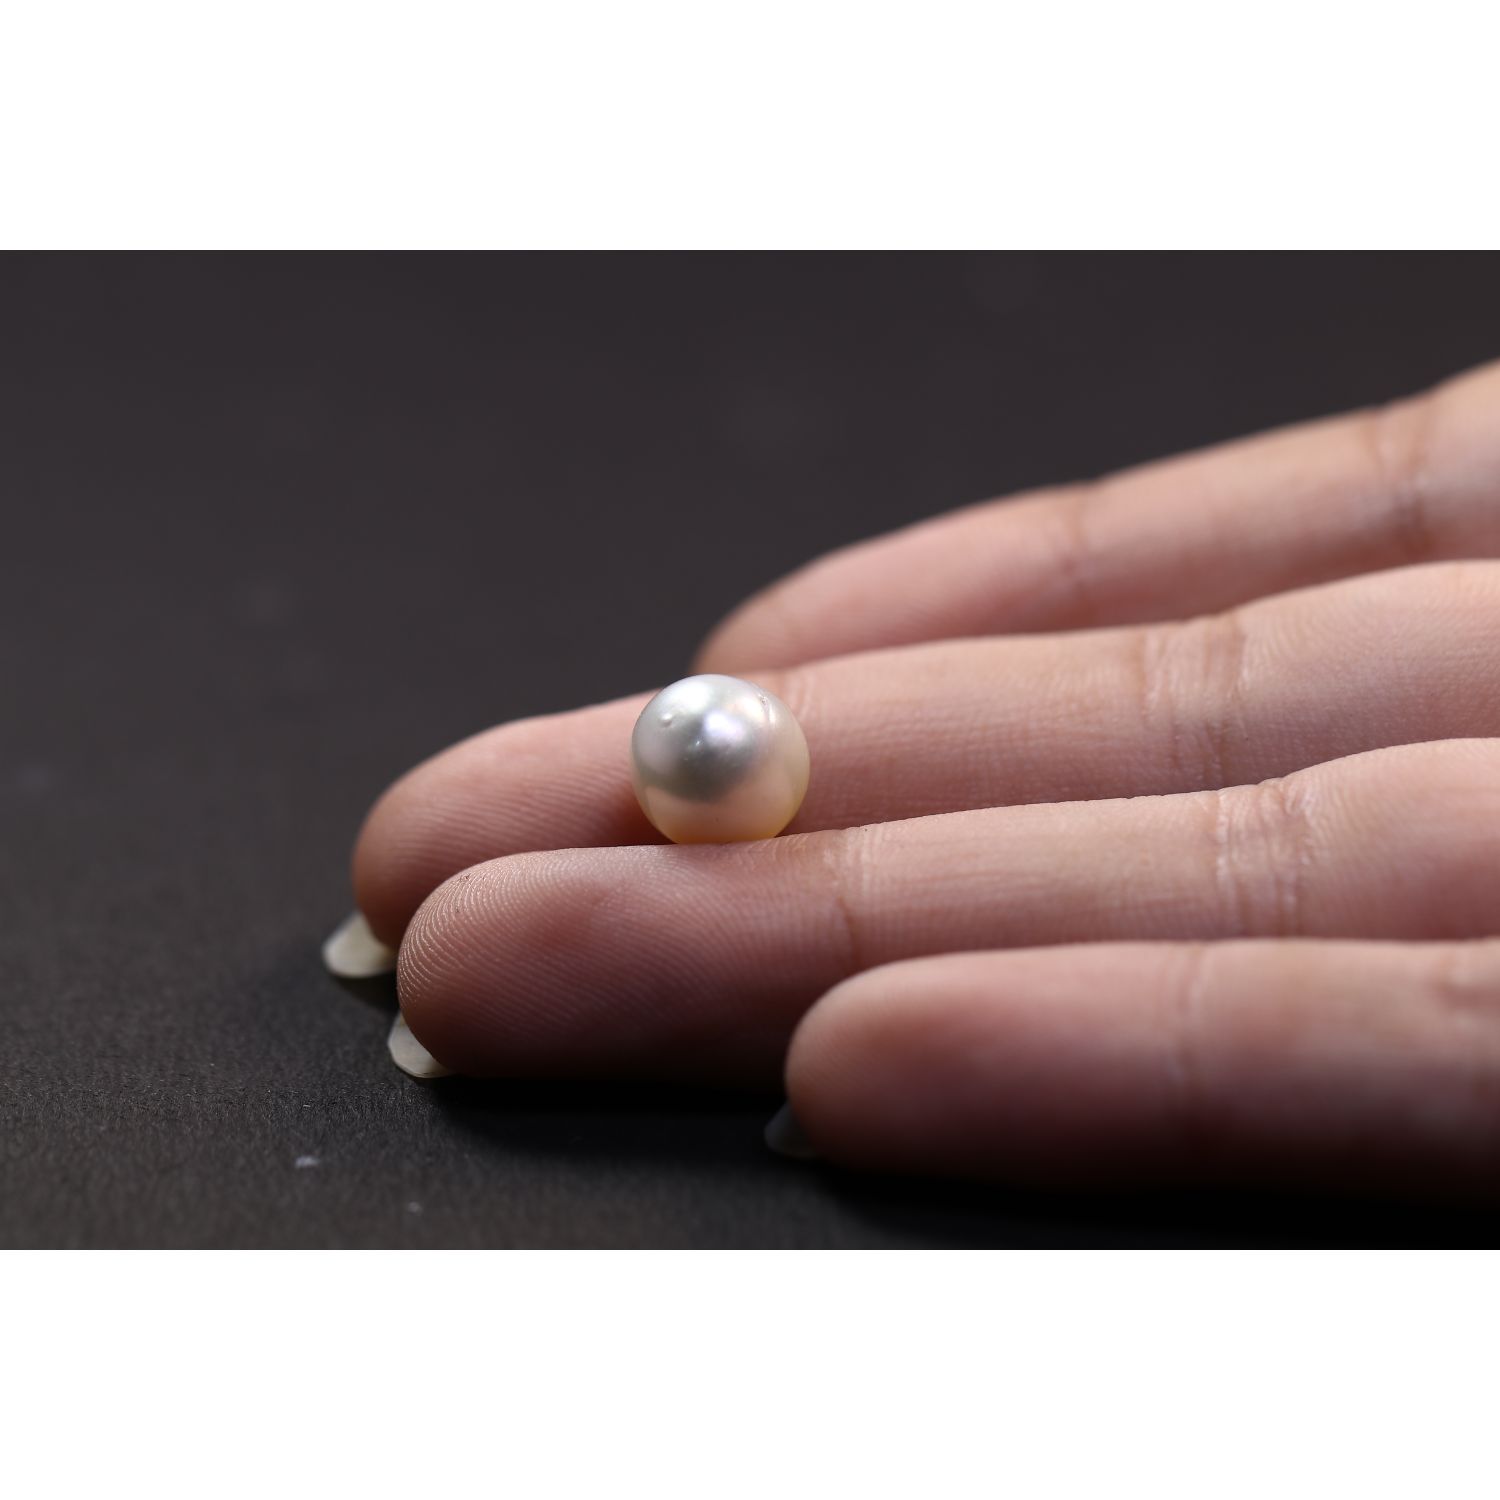 PEARL 5.71 Ct.